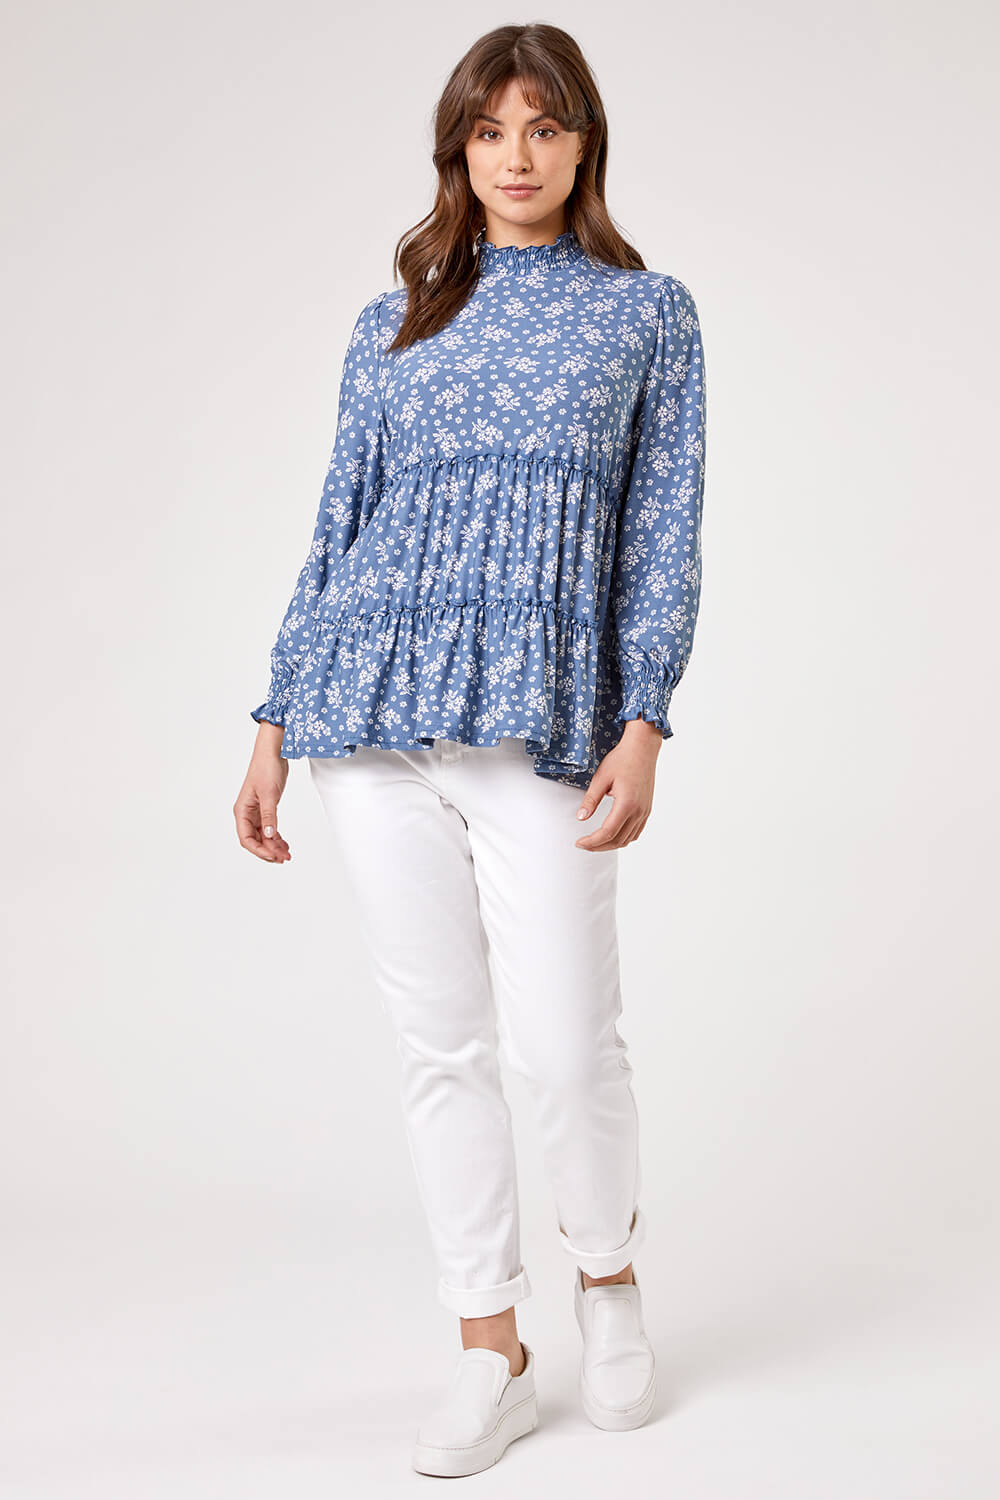 Blue Curve Tiered Floral Print Top, Image 3 of 5